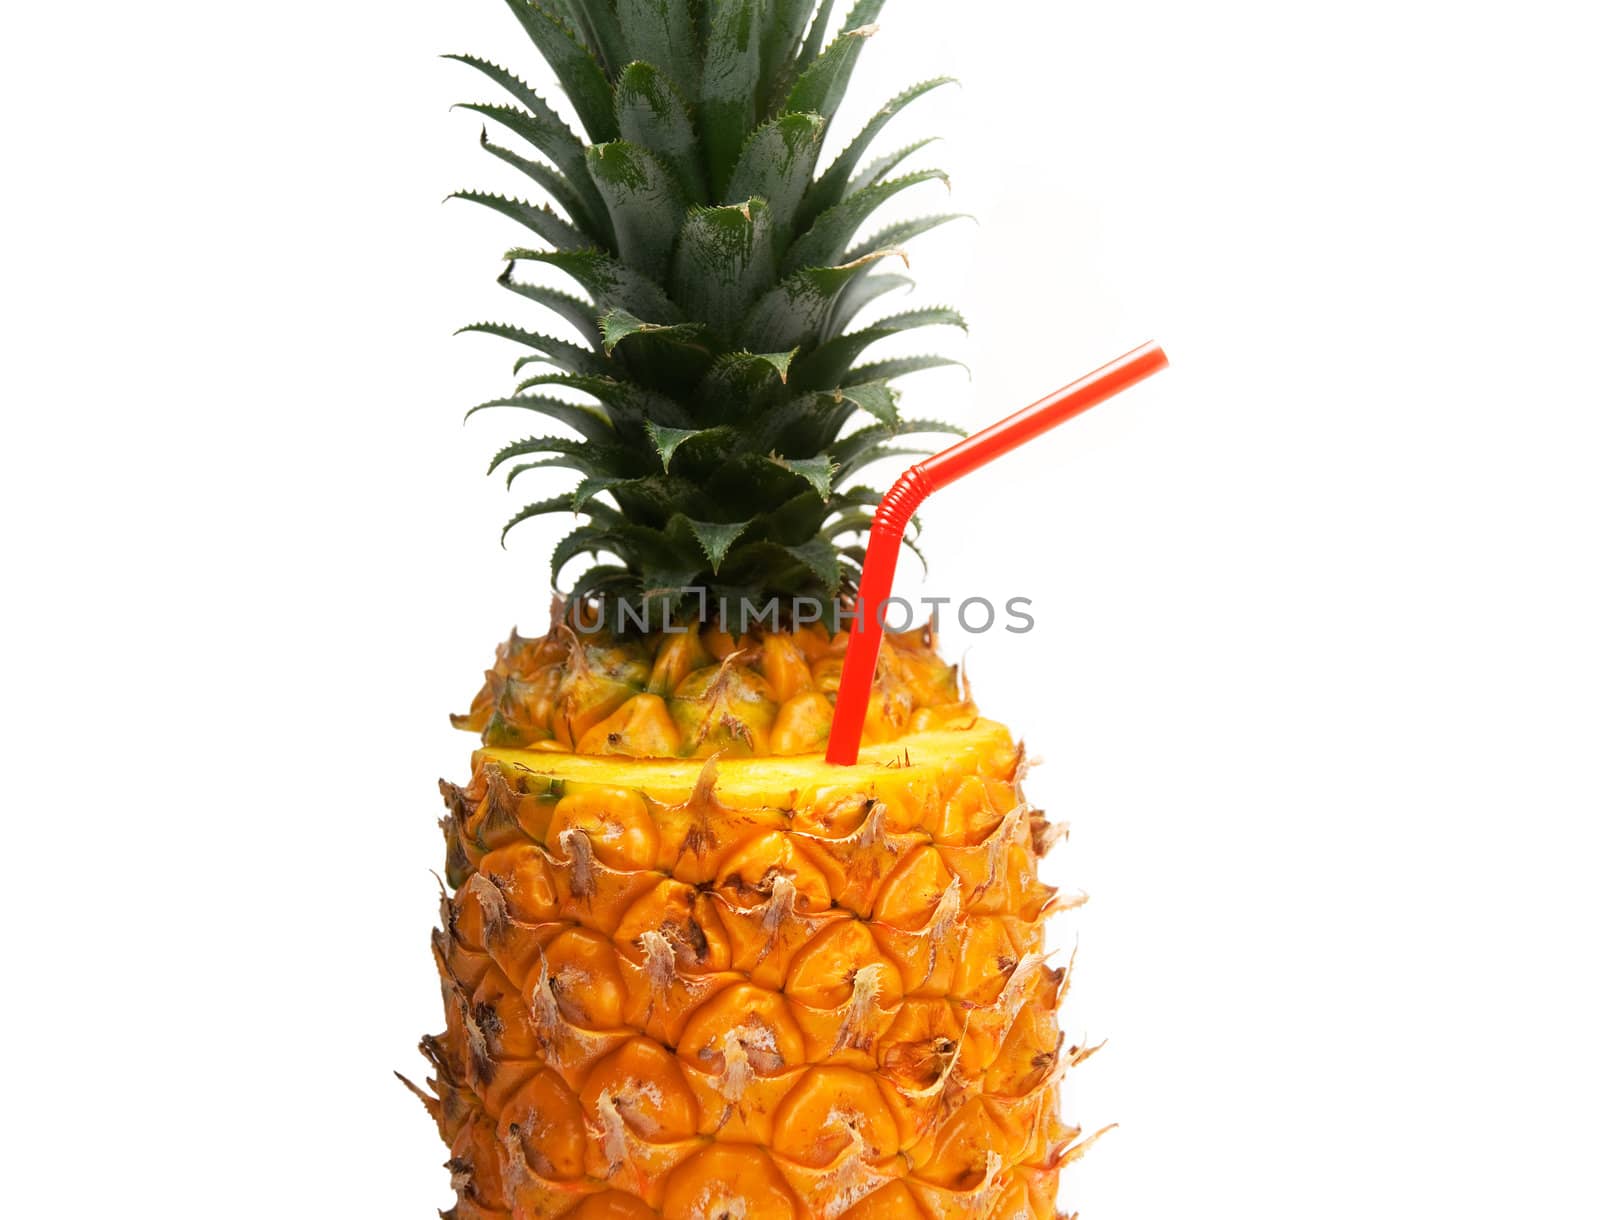 ripe pineapple cutted on top with red straw